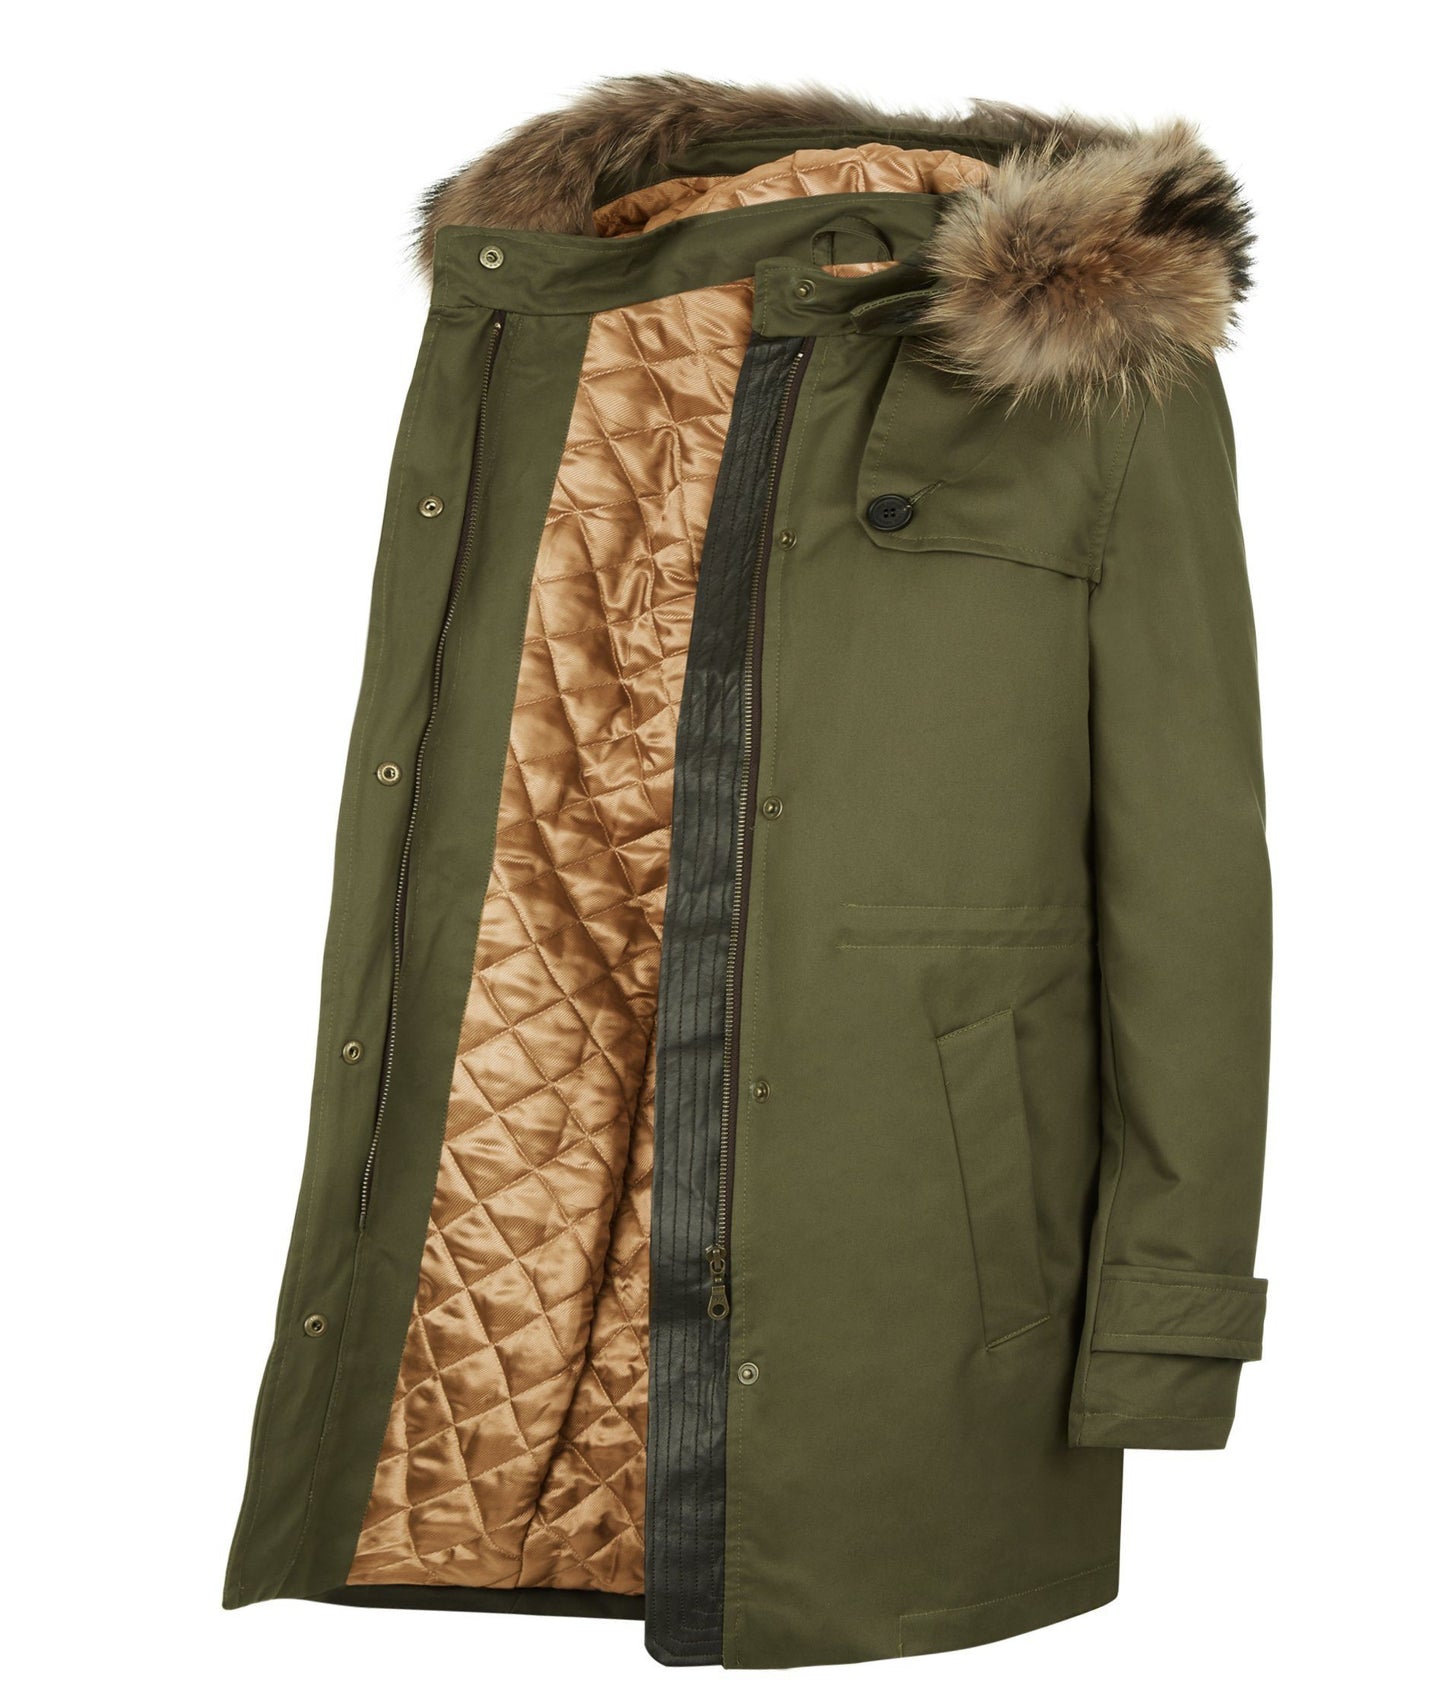 TROY Parka in Military Green